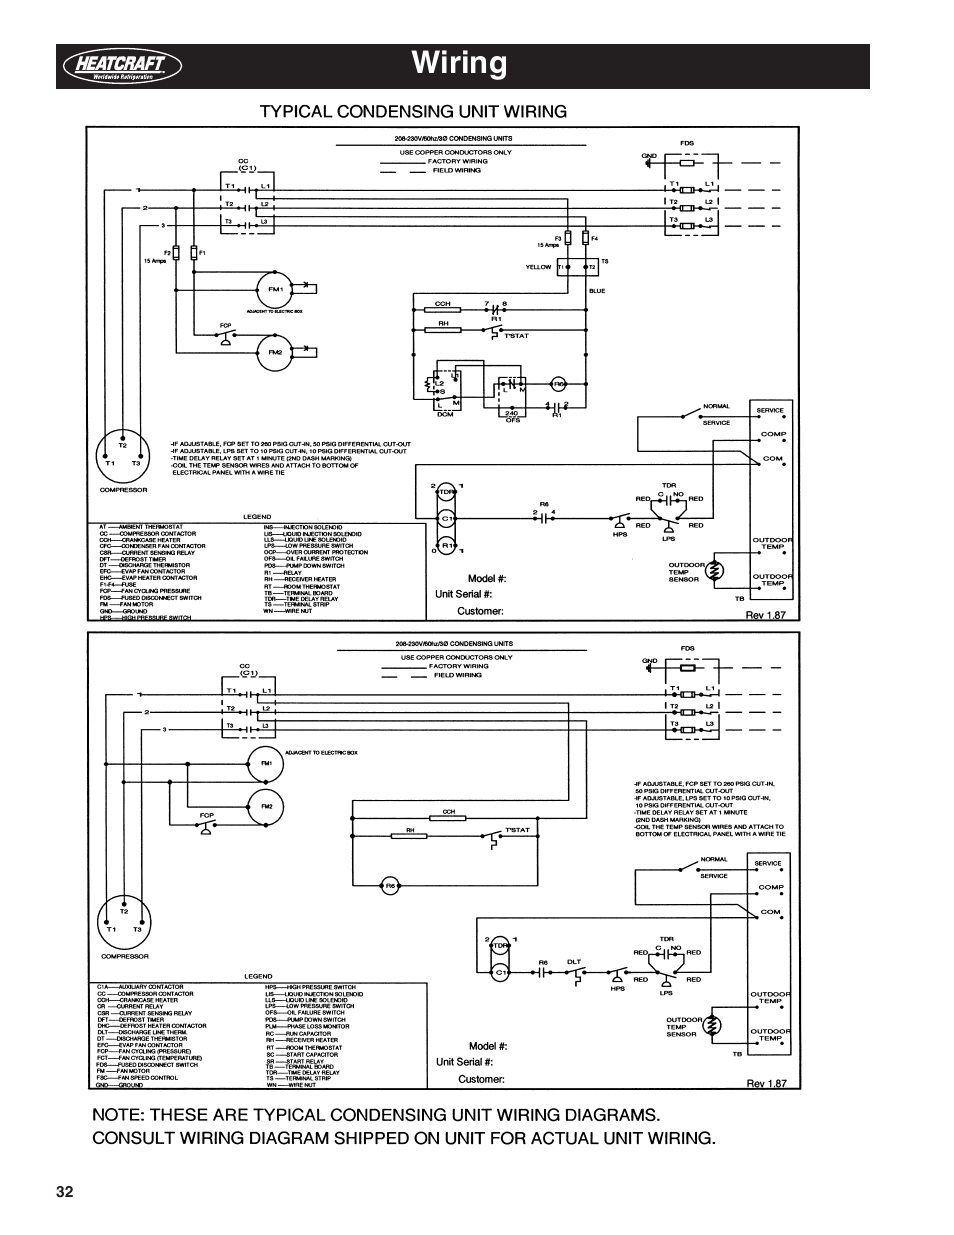 Wiring Diagram For Condensing Unit